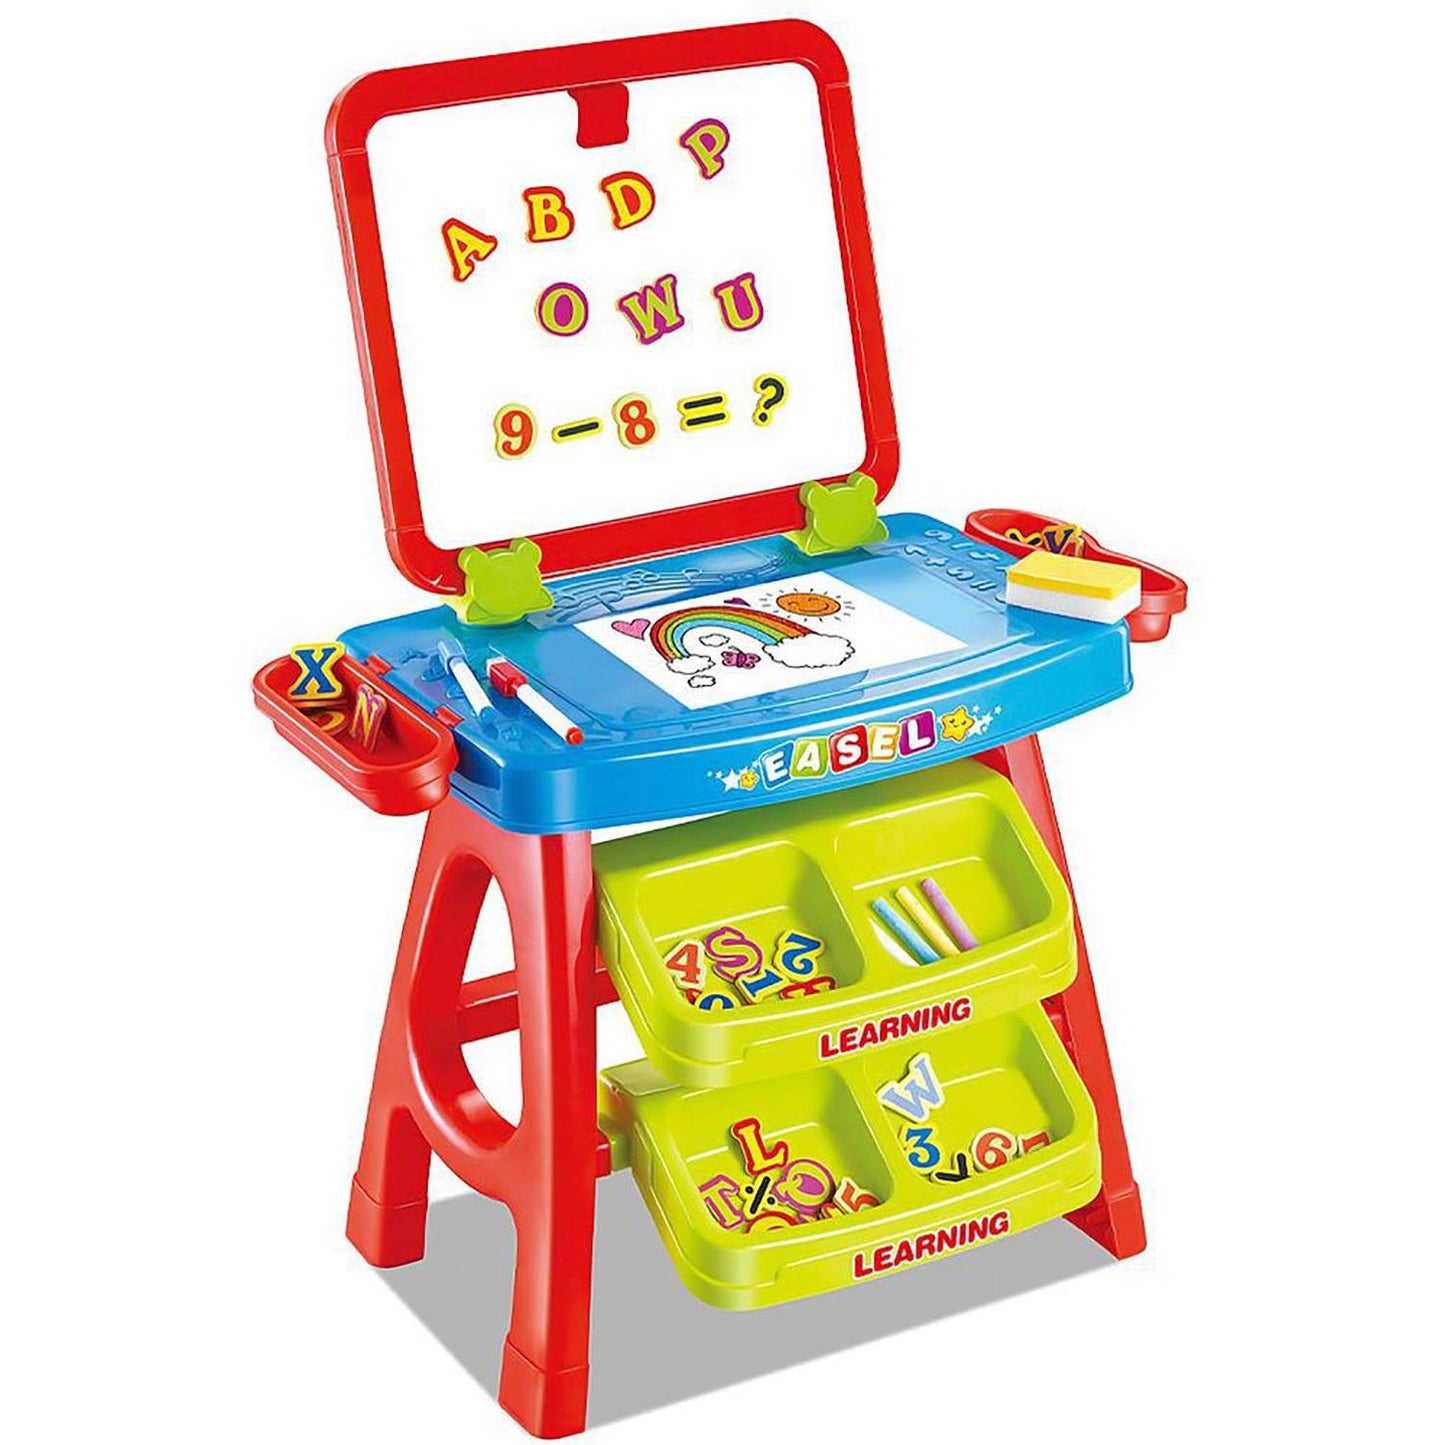 Learning Desk & Magnetic Easel Chalkboard by The Magic Toy Shop - UKBuyZone